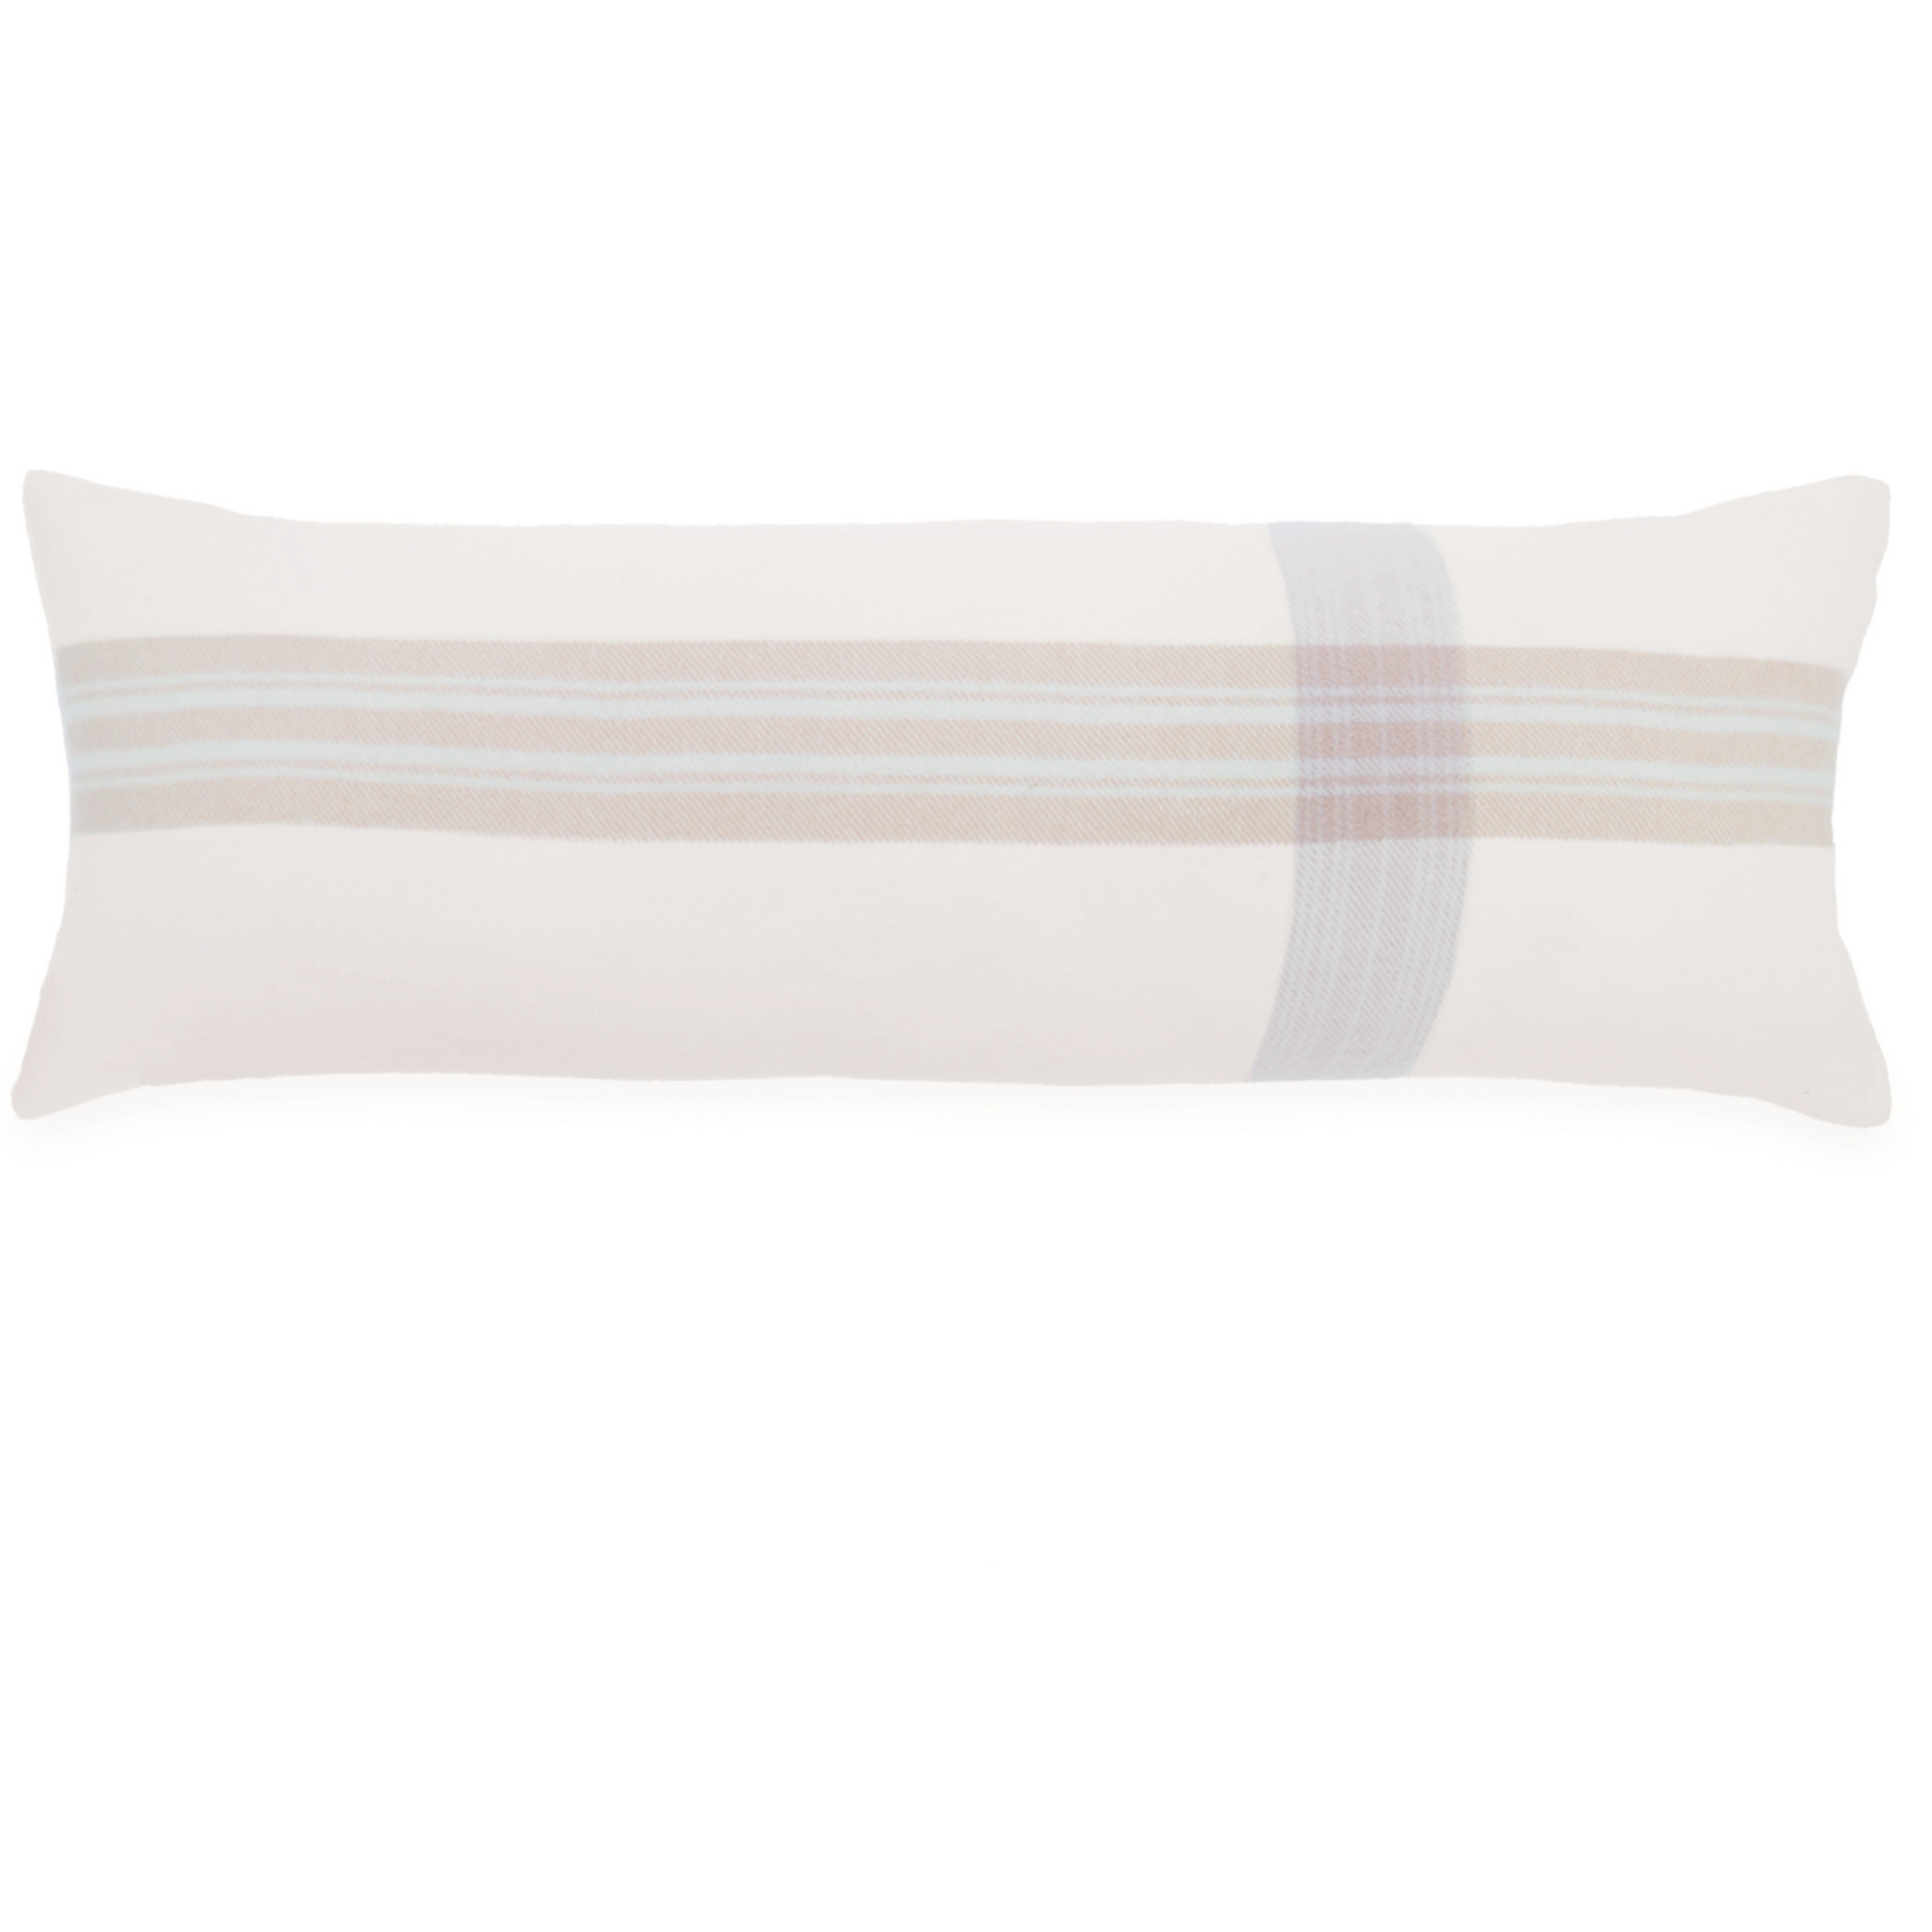 Geneva Ivory Taupe Lumbar Pillow by Pom Pom at Home